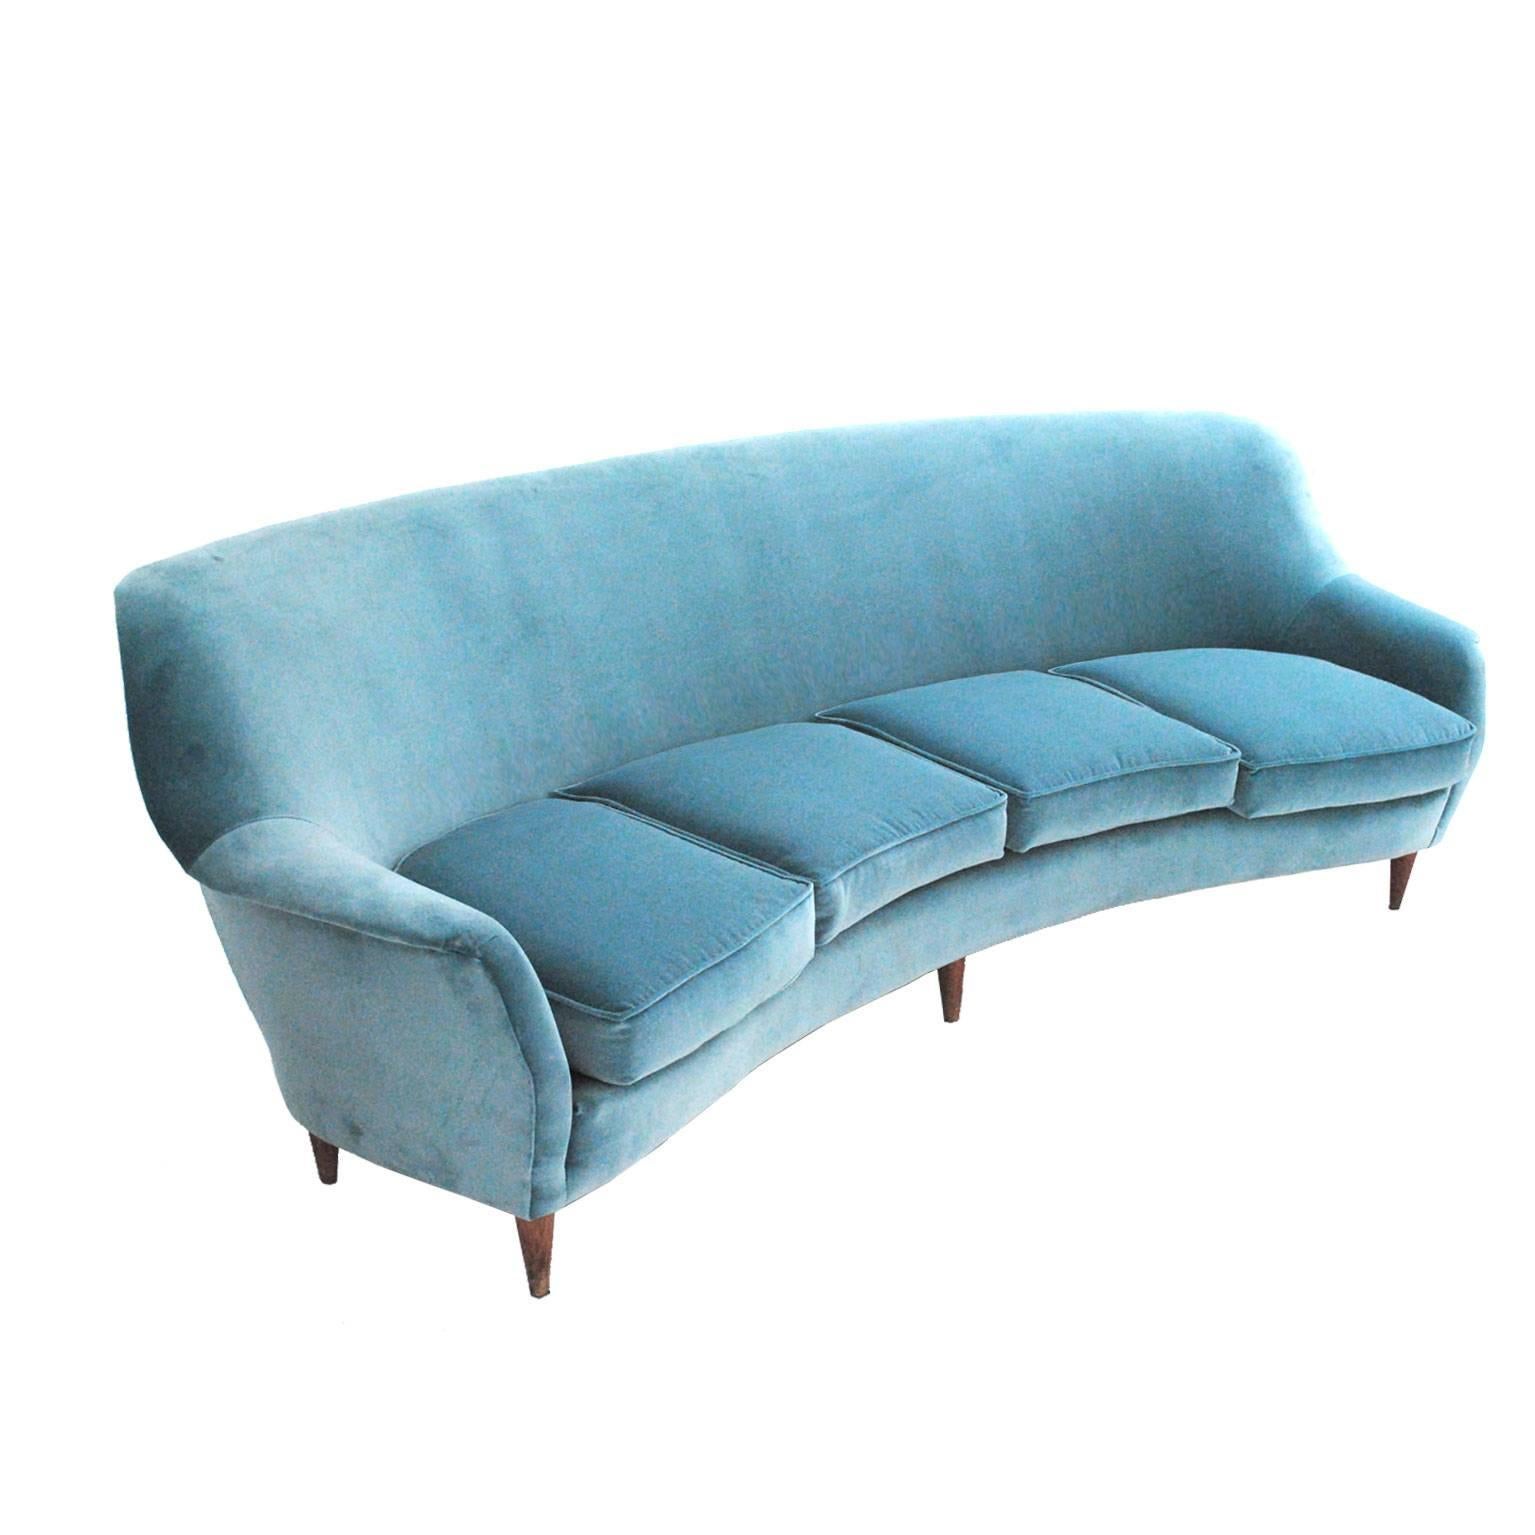 Italian curved four-seated sofa with structure made in solid wood upholstered in light blue cotton velvet edited by Gancedo with foot in solid oak.